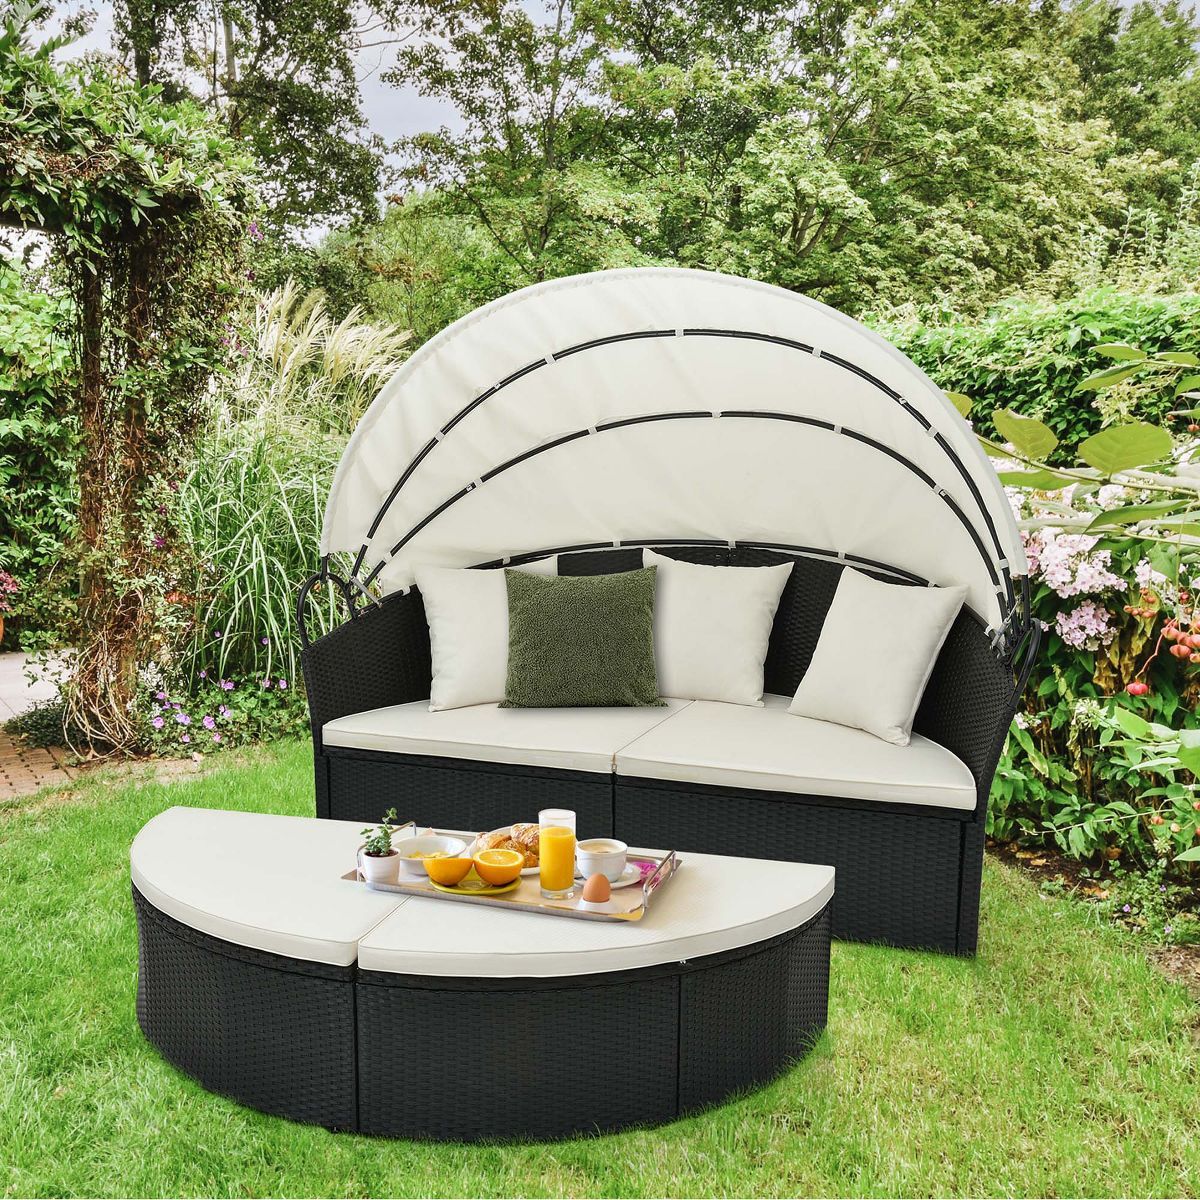 Costway Patio Round Daybed with Retractable Canopy Rattan Sectional Seating Black/White | Target